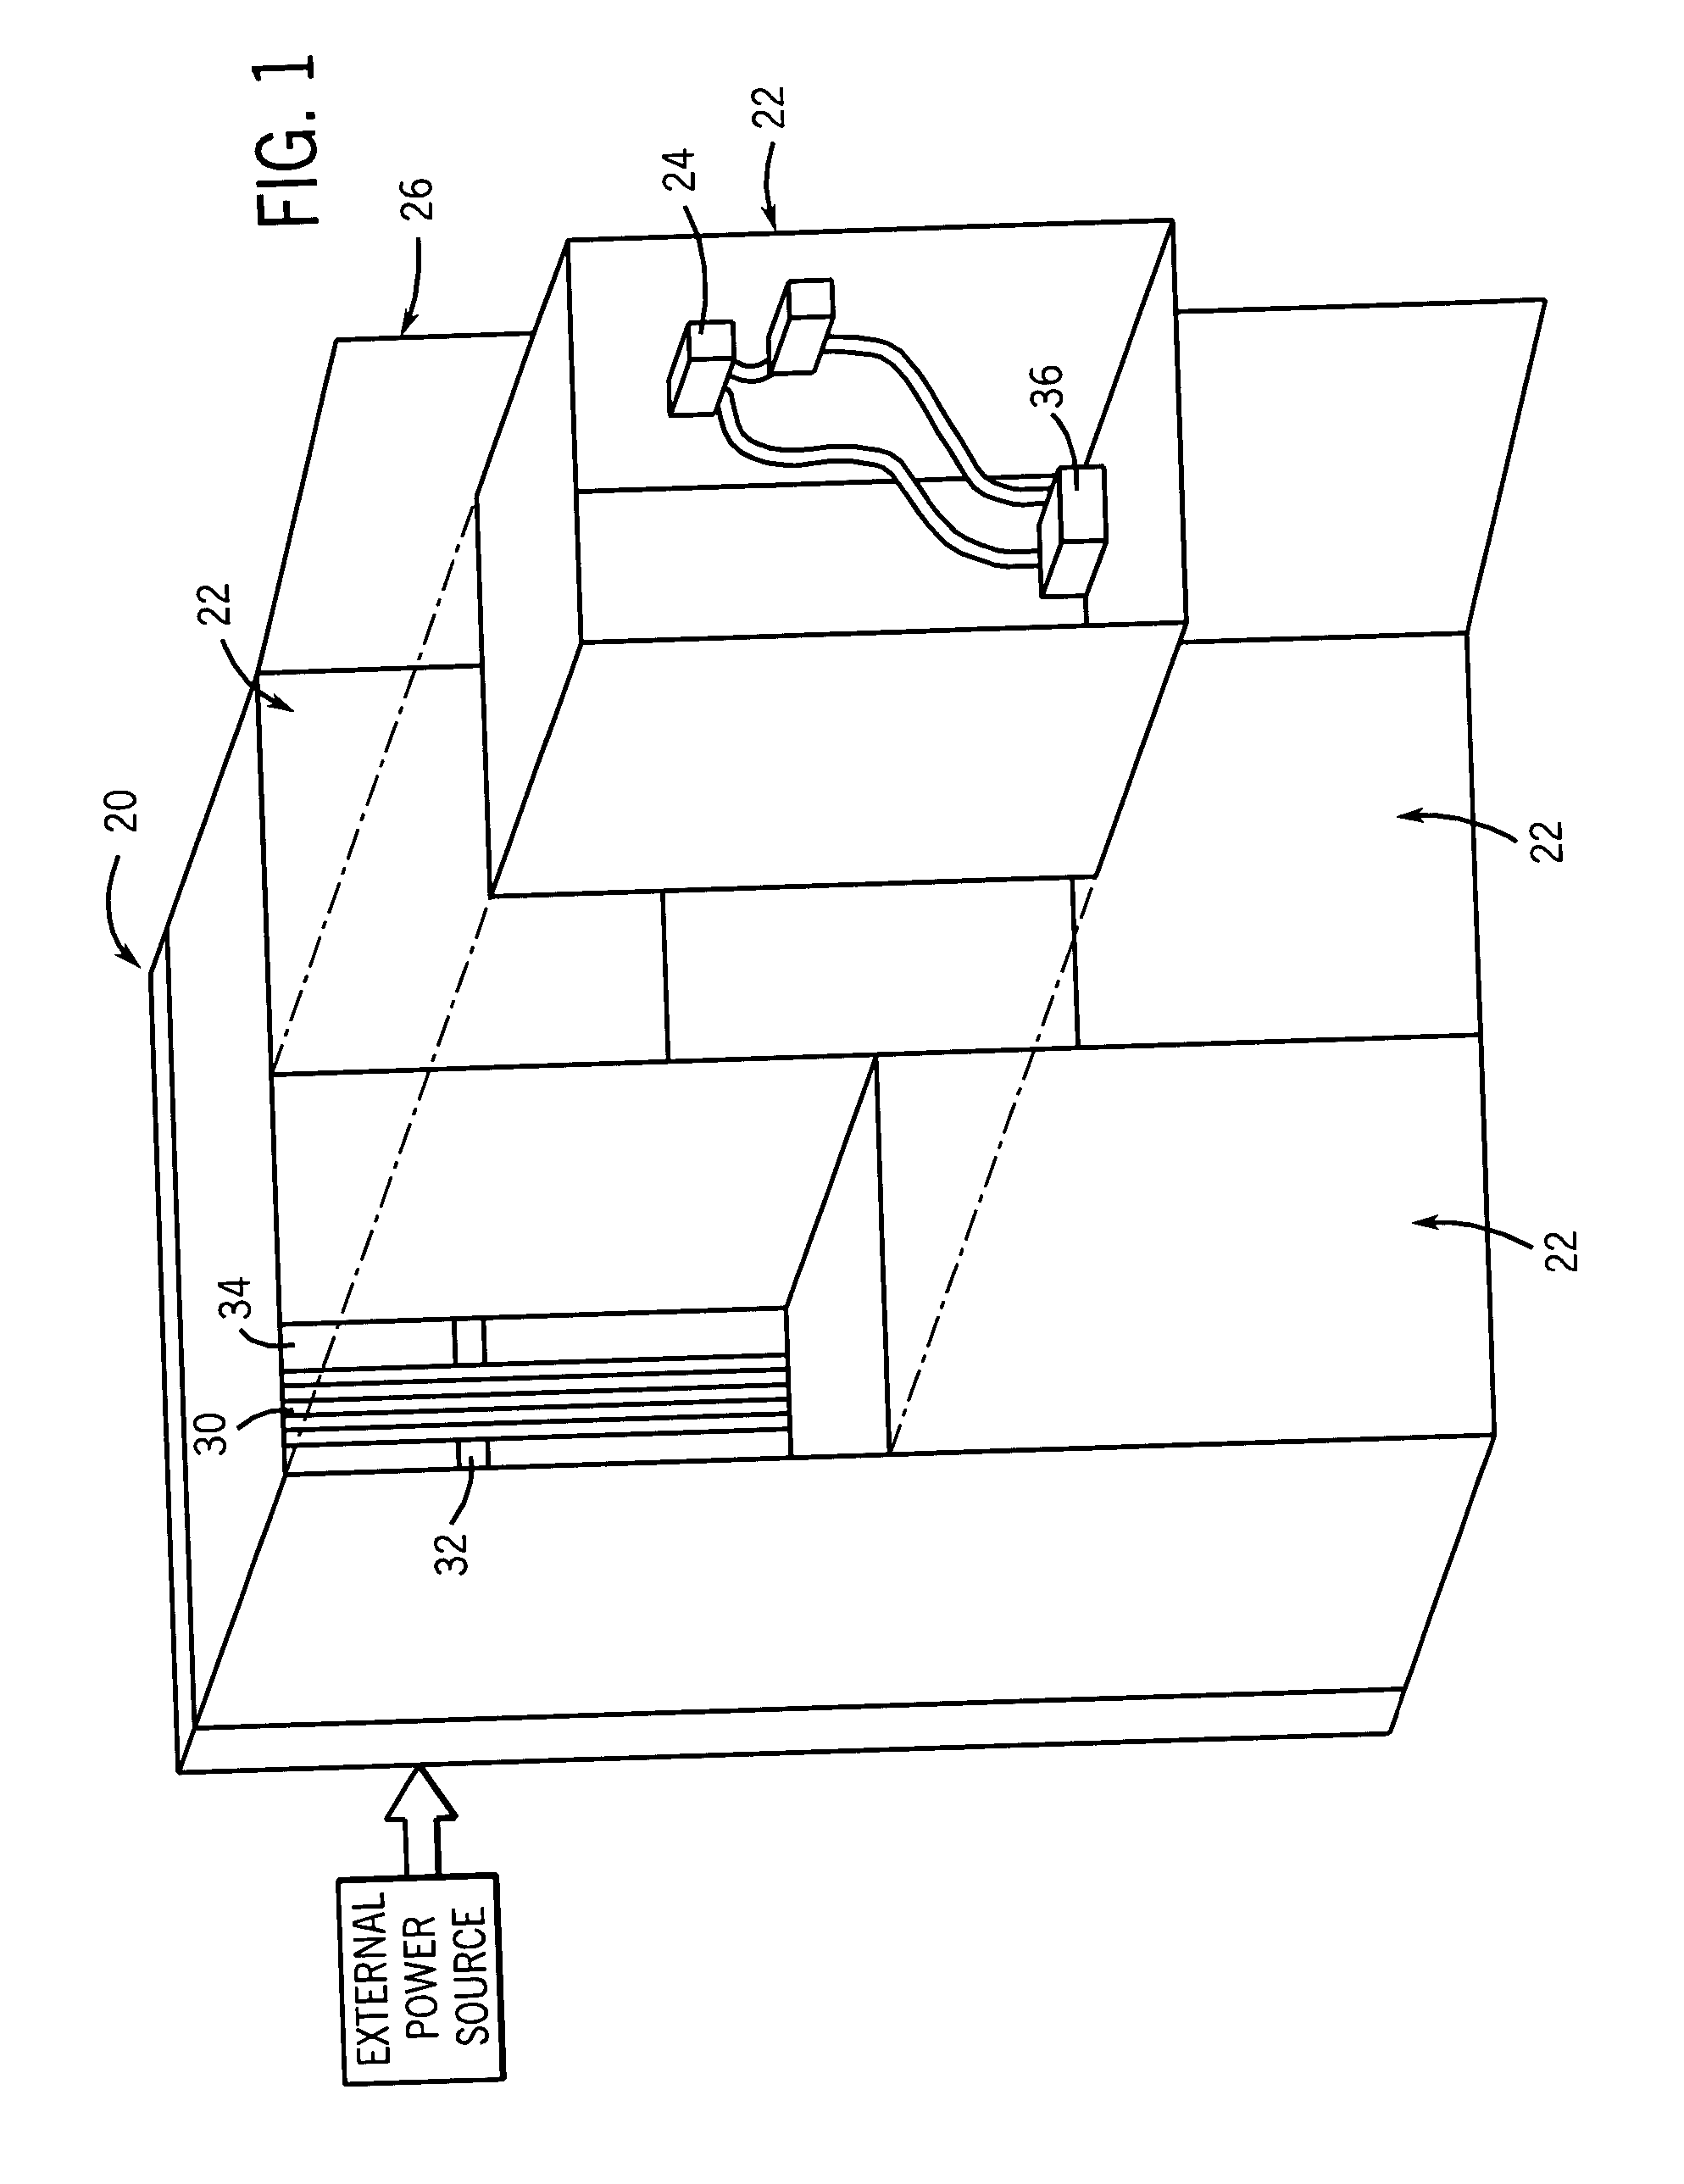 Rail system for distributing power and data signals